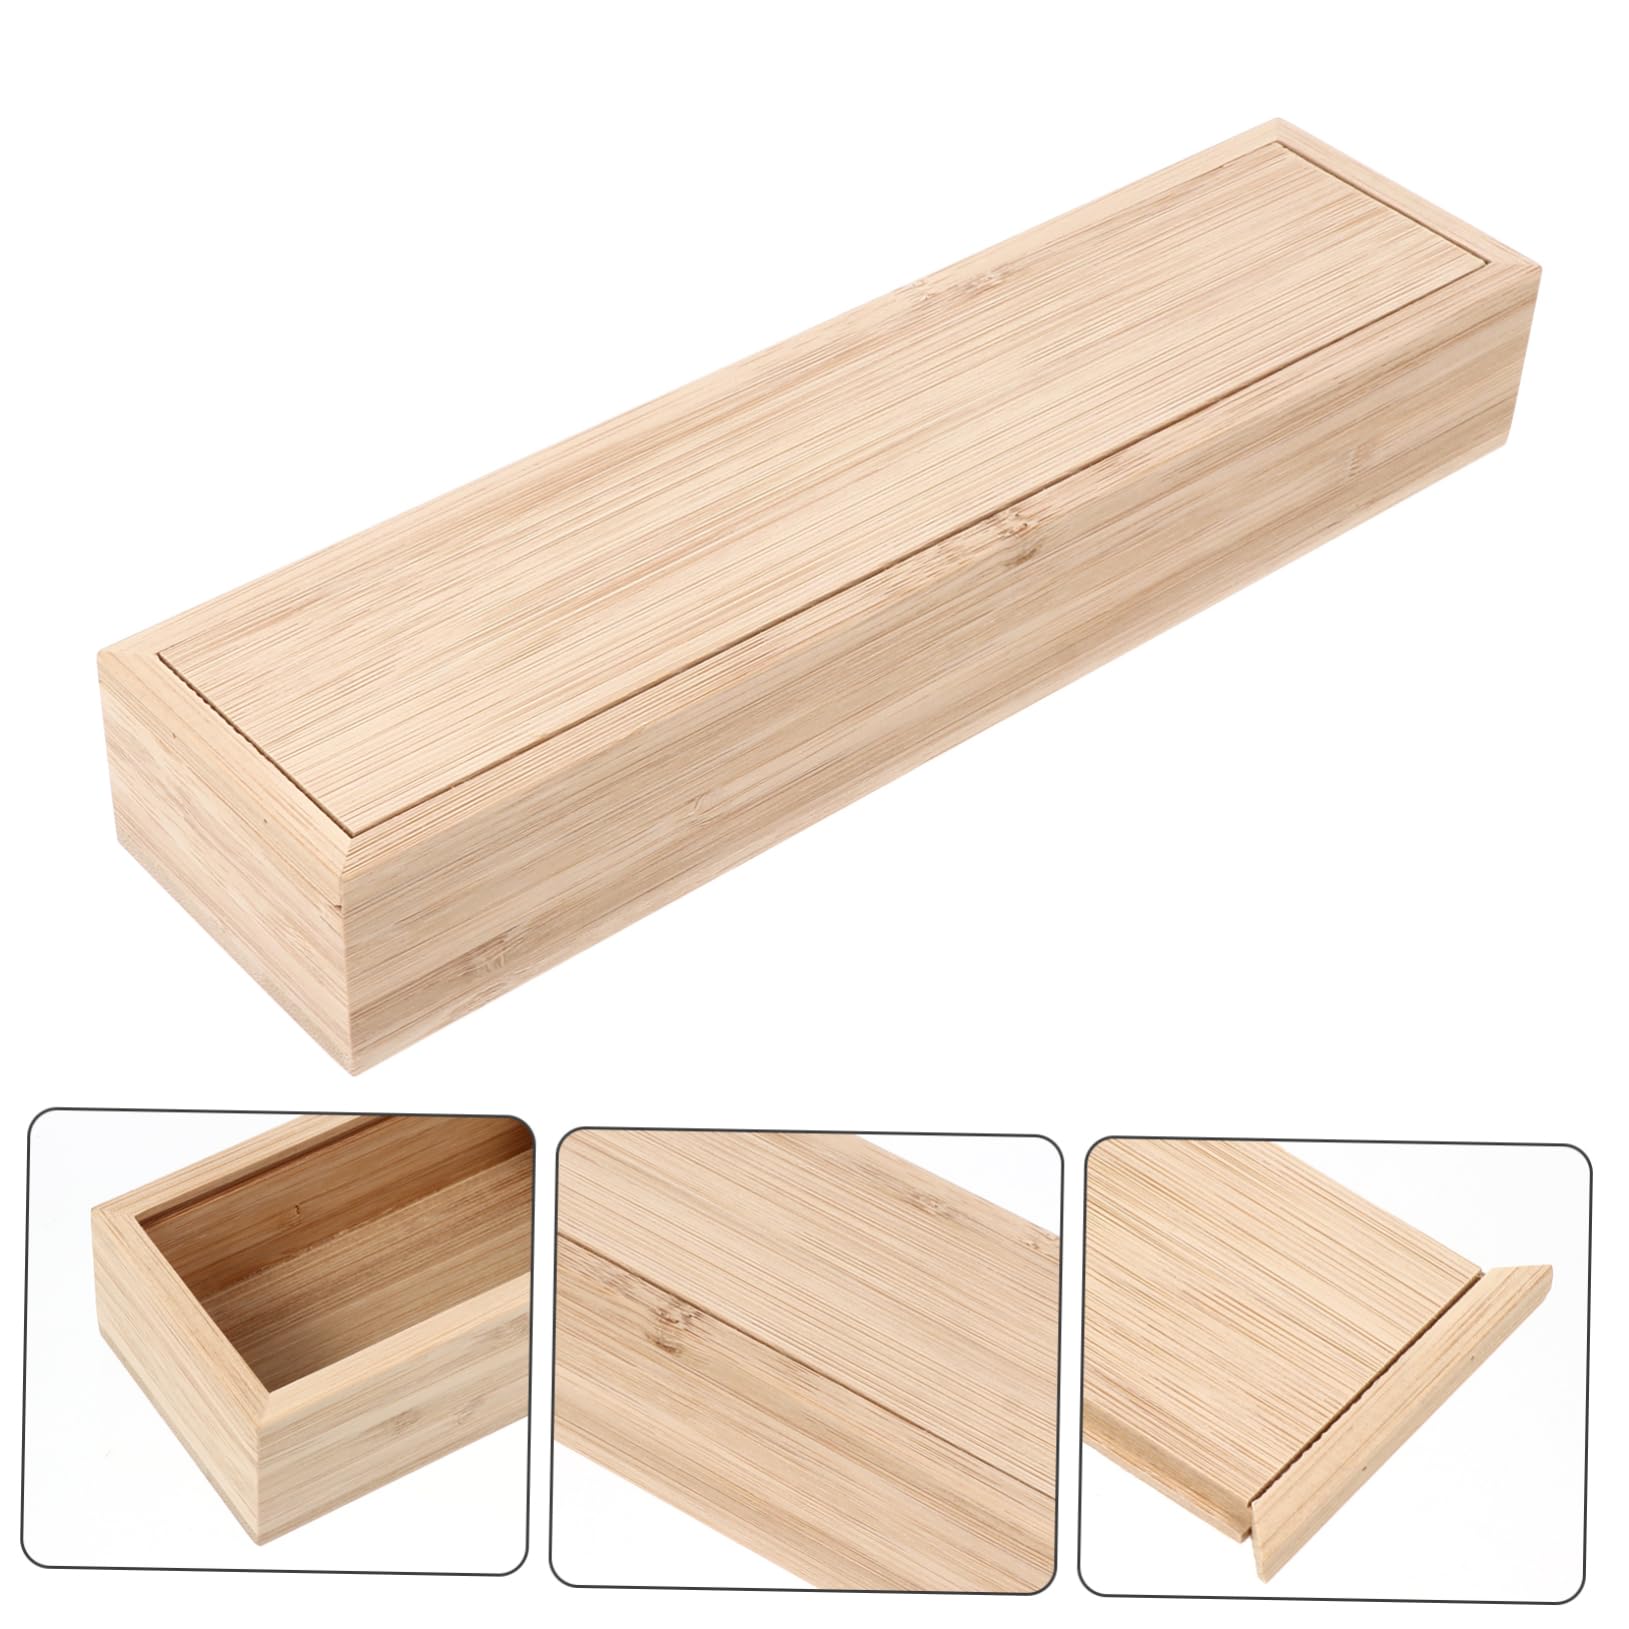 FELTECHELECTR 1pc Box Bamboo Rectangular Meal Silverware Organizer with Lid Camping Cutlery Organizer Expandable Cutlery Tray Travel Cutlery Bamboo Tableware Holder Work - Wooden Brush